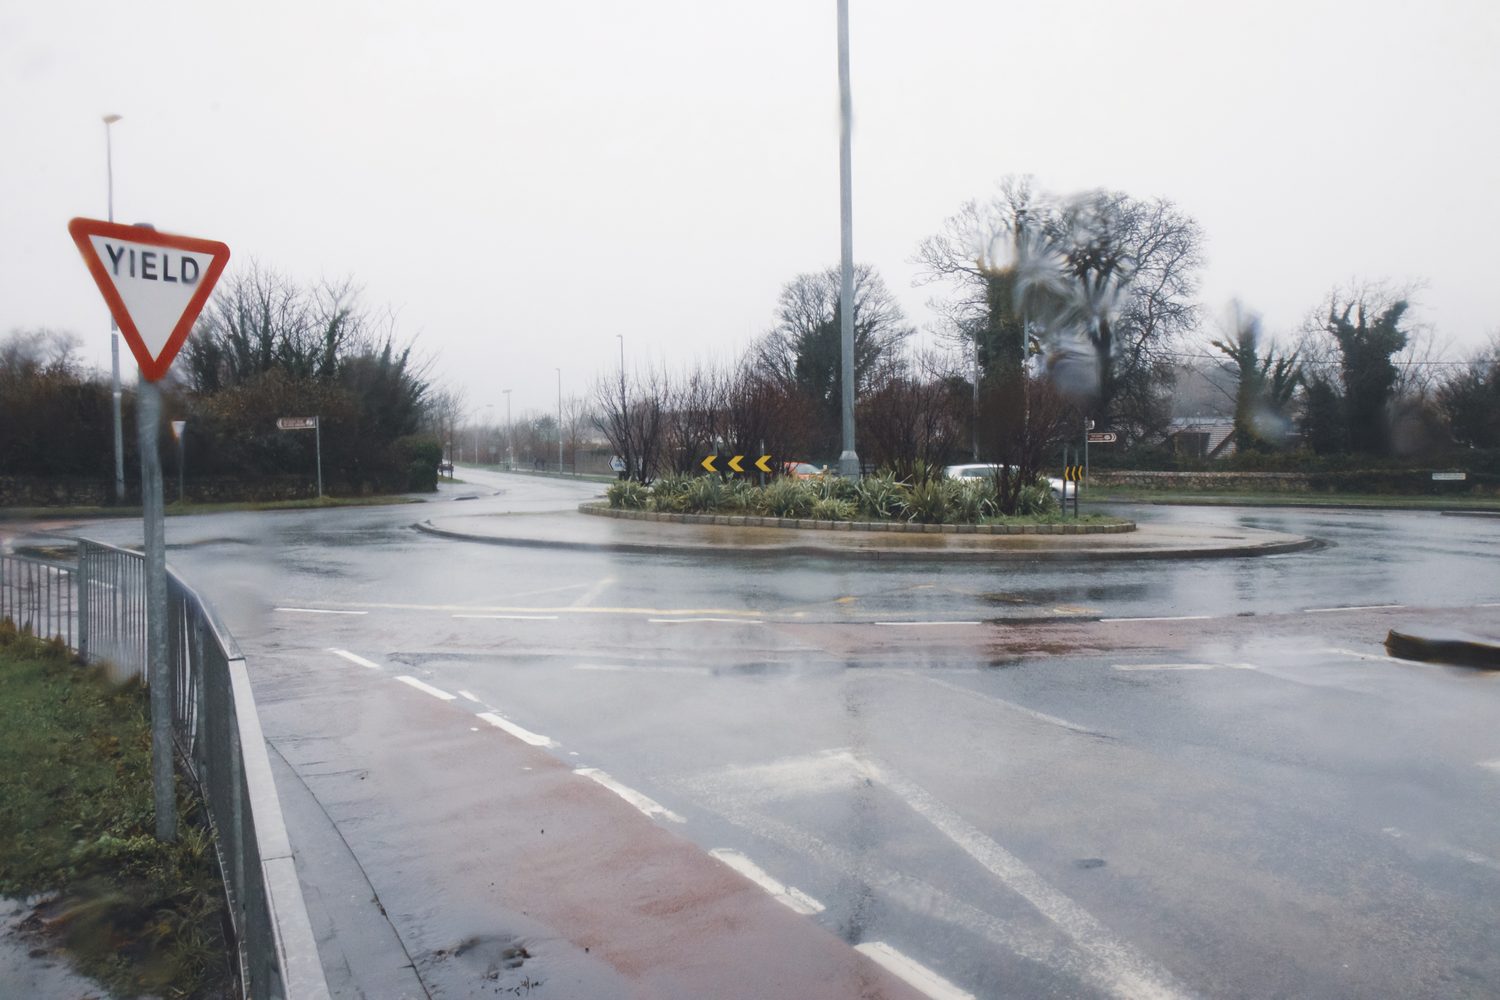 Roundabouts in Ireland: a driver